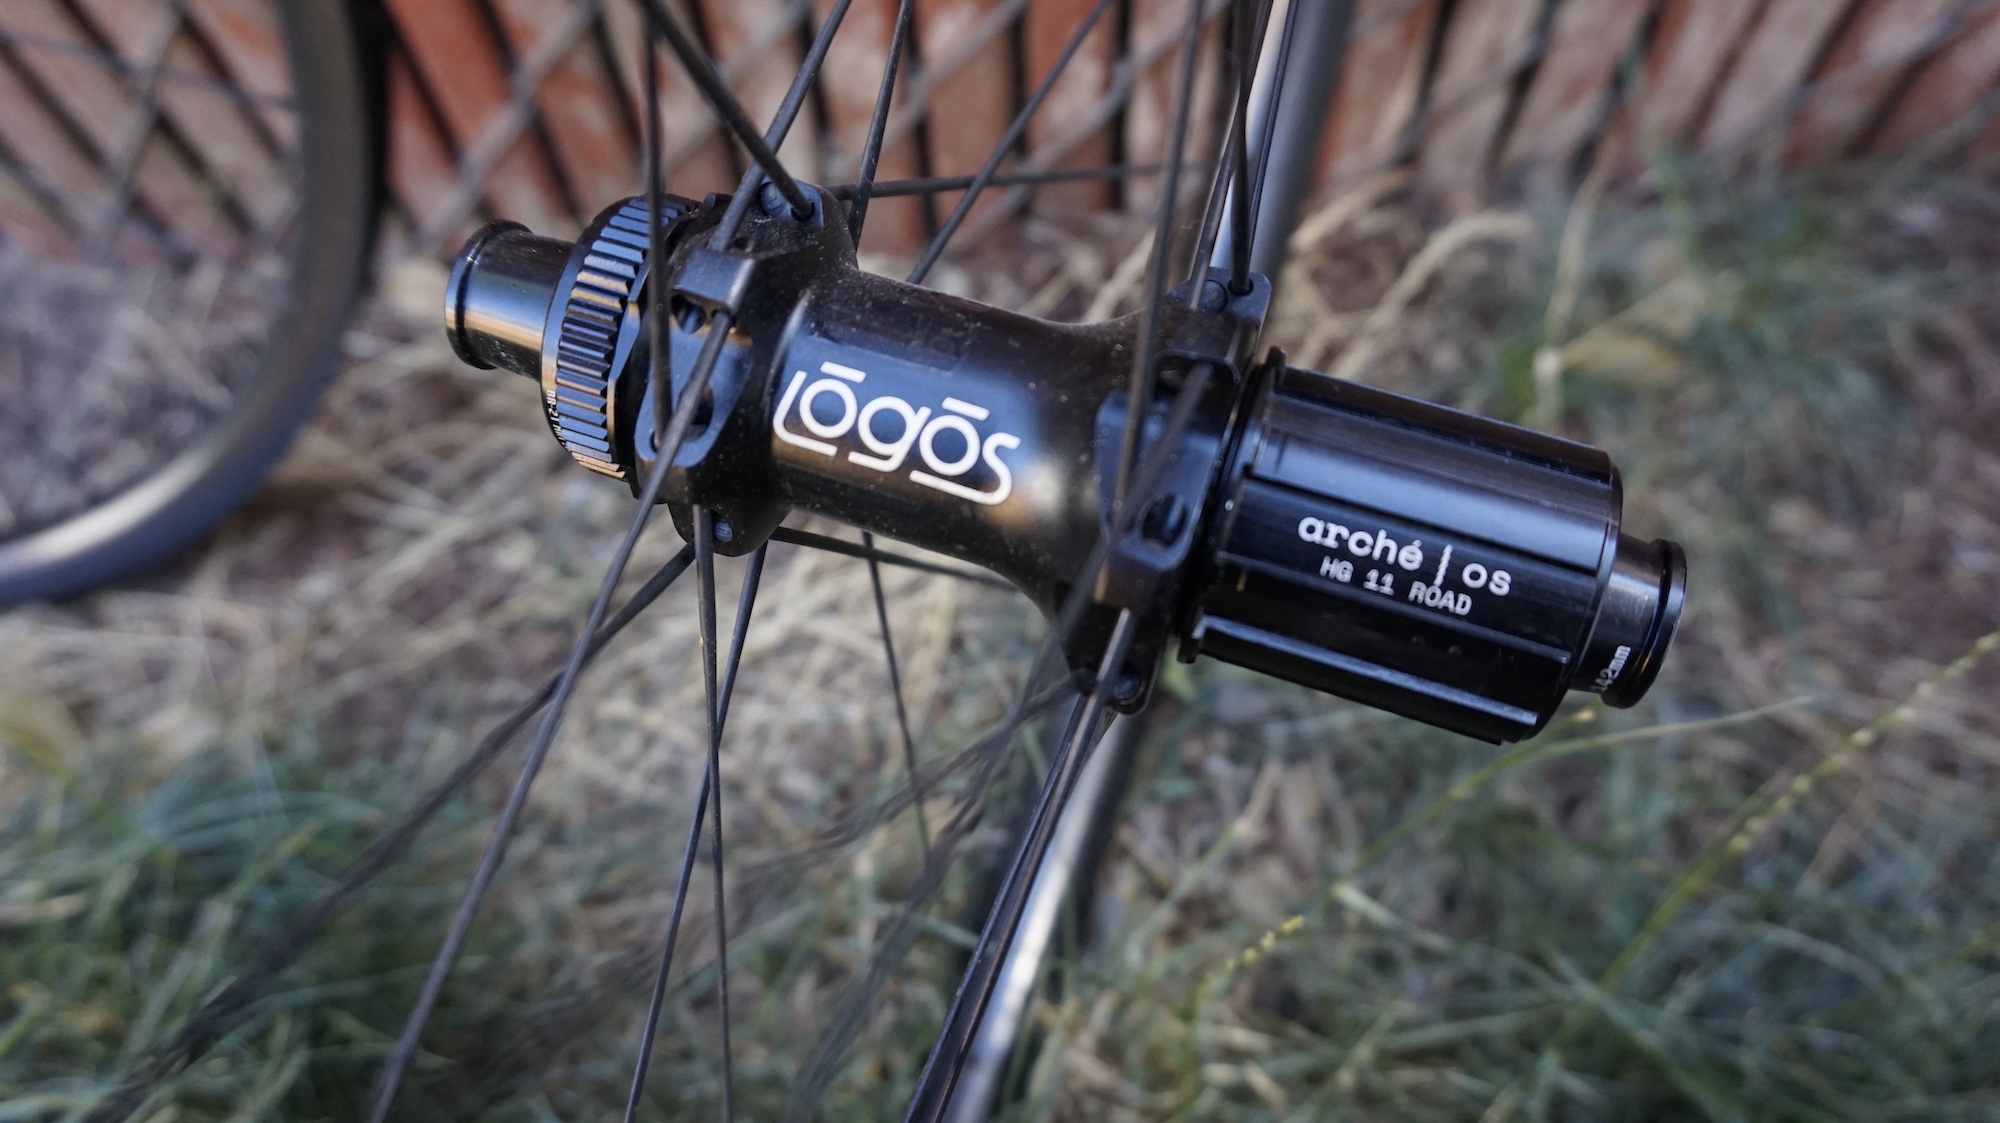 Lōgōs' arché|os hub is based around the now open dual-spring Star Ratchet design popularized by DT Swiss. Reliable, serviceable, robust and easy to use, this design is a perfect fit for a do-it-all adventure wheel.